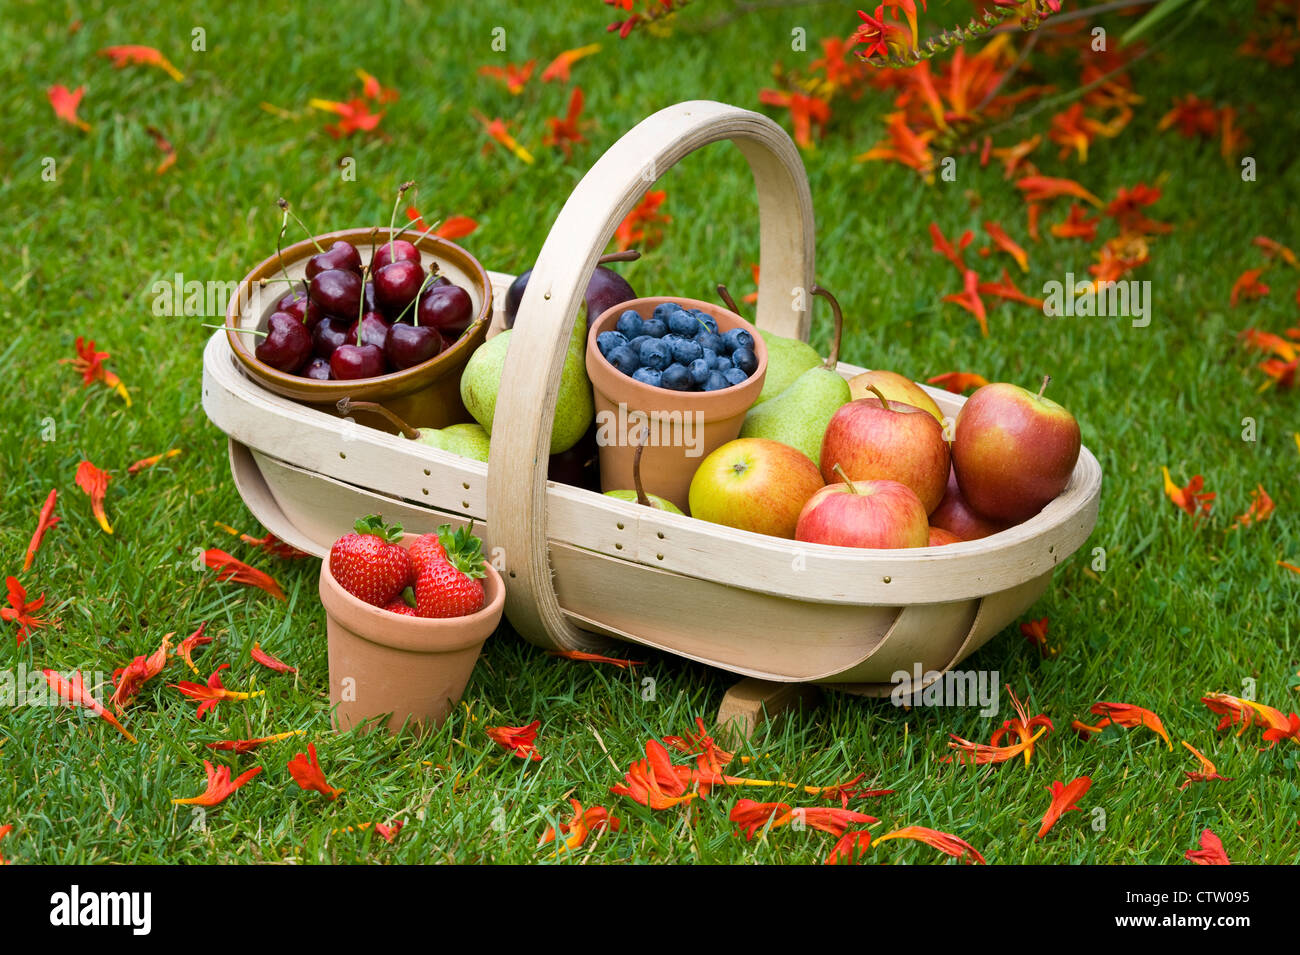 trug of harvested british summer fruit including: blueberries, cherries, apples, pears, strawberries, plums on a lawn Stock Photo